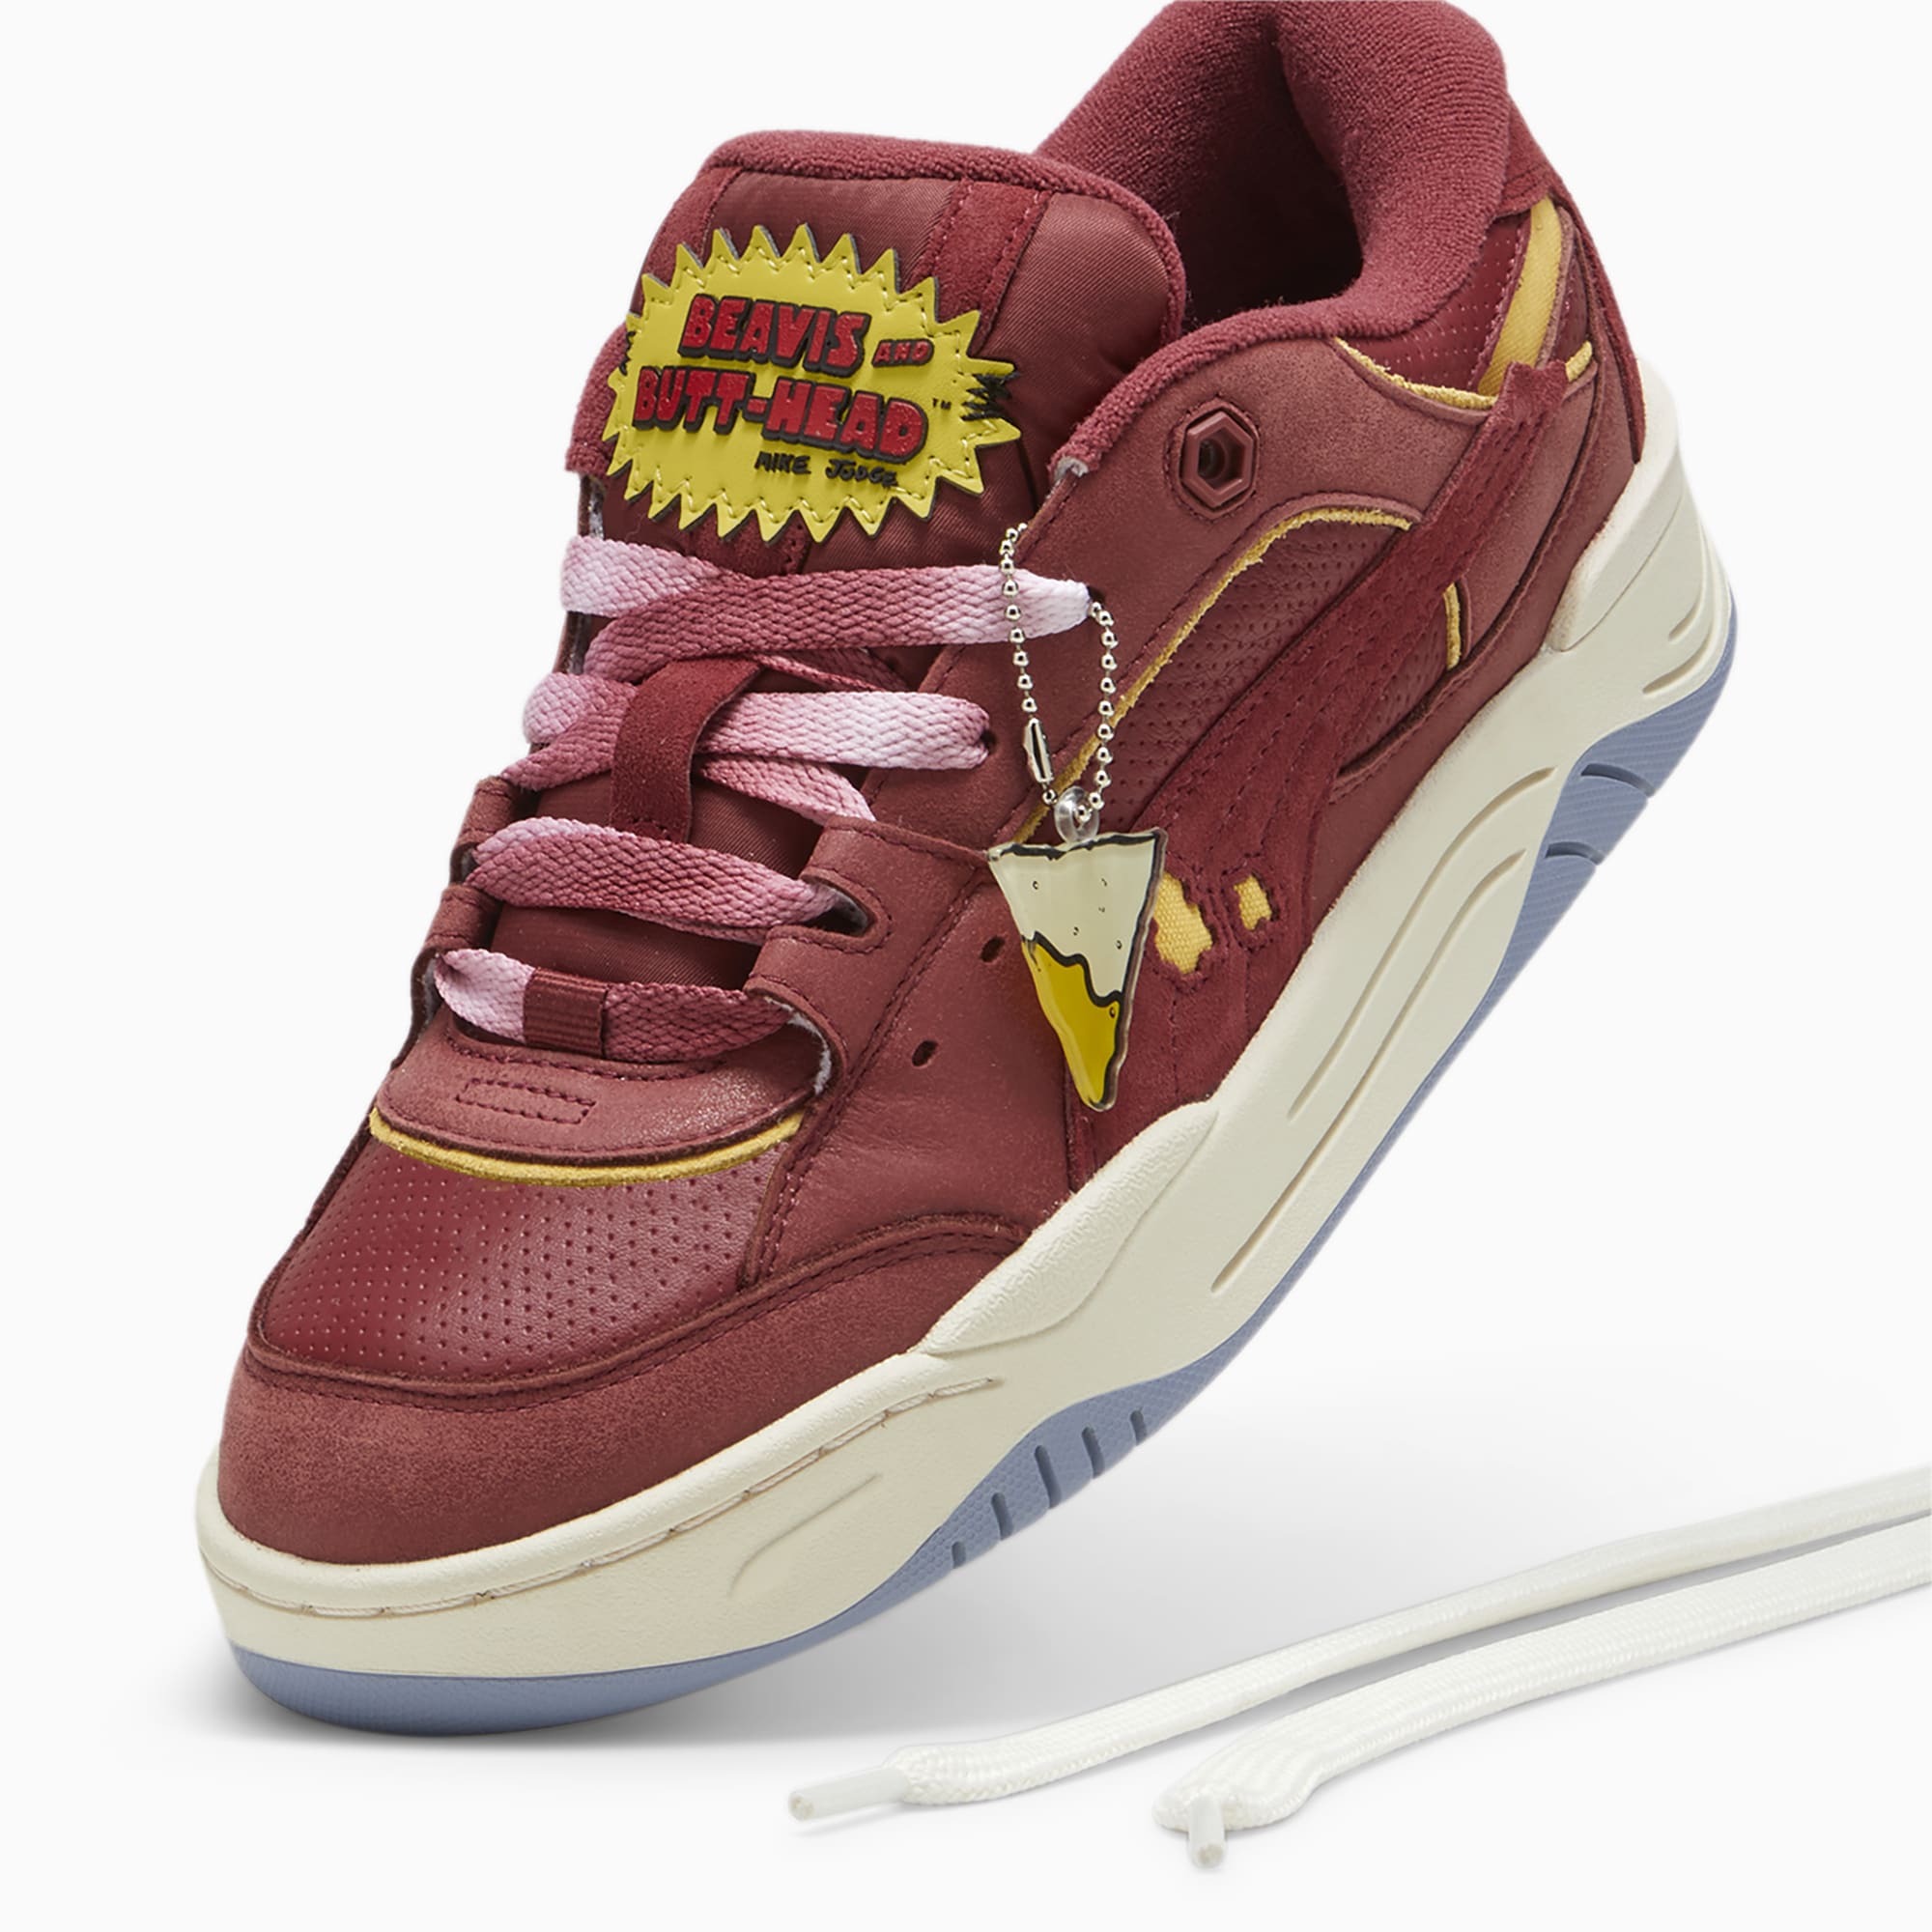 Chaussure Sneakers PUMA-180 PUMA X BEAVIS AND BUTTHEAD Pour Femme